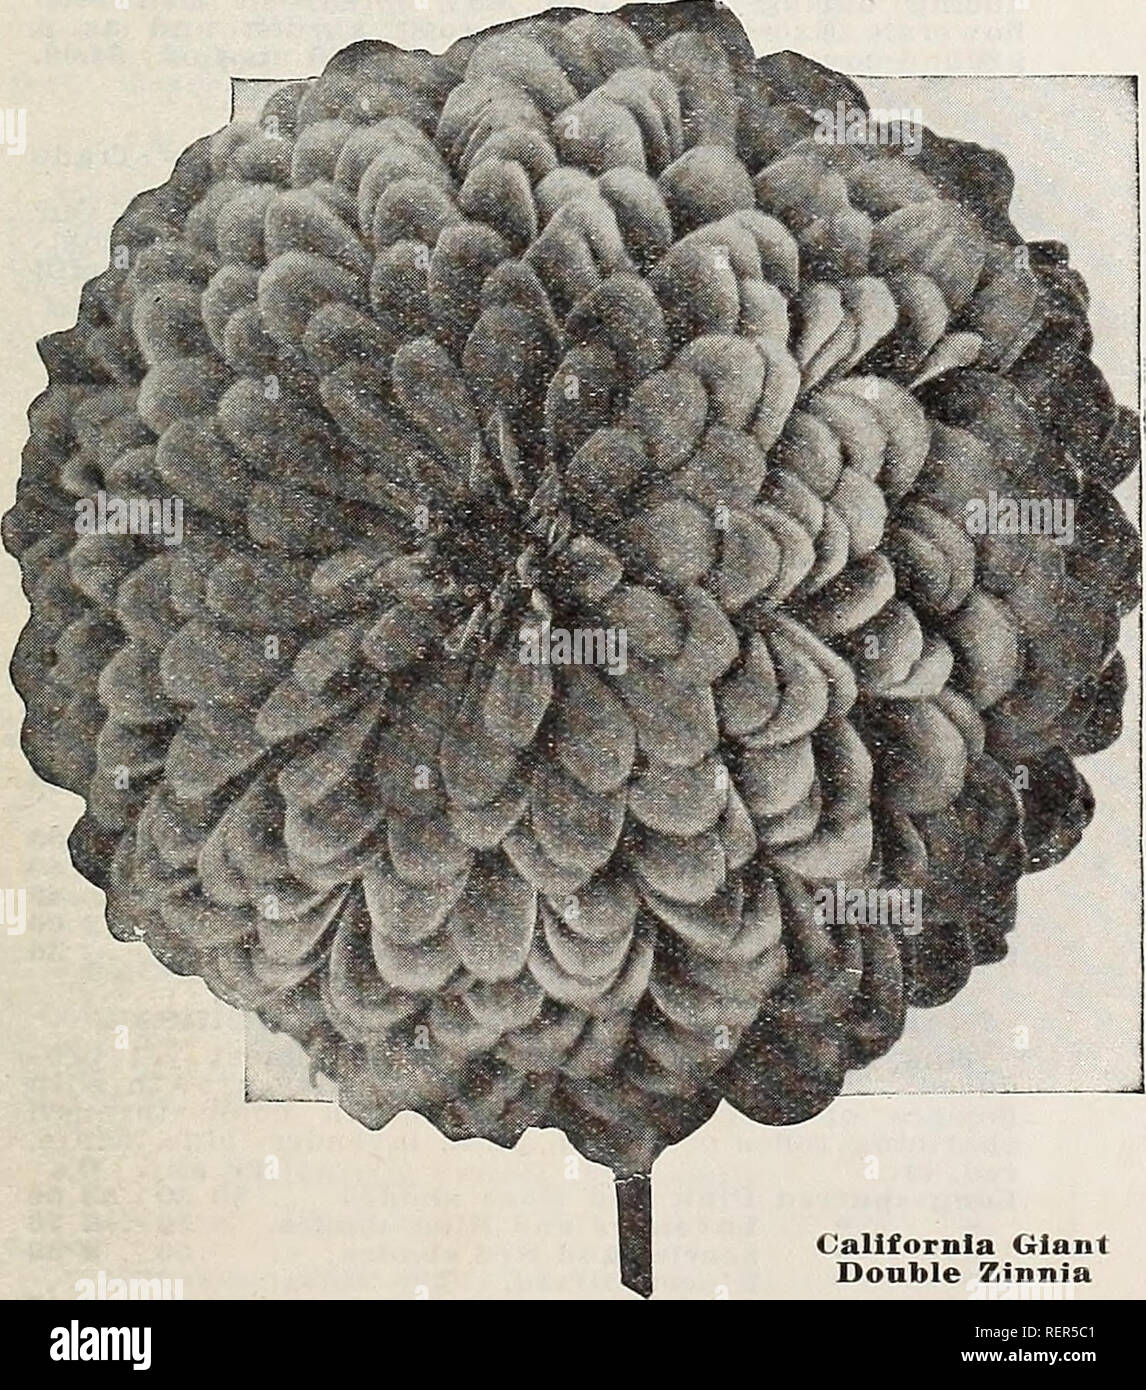 . Dreer's wholesale price list for florists : flower seeds plants and bulbs vegetable and lawn grass seeds sundries. Bulbs (Plants) Catalogs; Flowers Seeds Catalogs; Nurseries (Horticulture) Catalogs; Gardening Equipment and supplies Catalogs. Giant Dahlia-Flowered Zinnia. California Giant Double Zinnias Of strong, robust growth, 3 feet high, with Oz. SI 00 colossal flowers frequently measuring from 5 to 6 inches in diameter. Tr. pkt Grenadier. Rich crimson scarlet $0 25 Miss Willmott. Charming tone of soft but bright rose pink.. 25 Lemon Queen. Clear primrose.. 25 Orange King. Rich golden ora Stock Photo